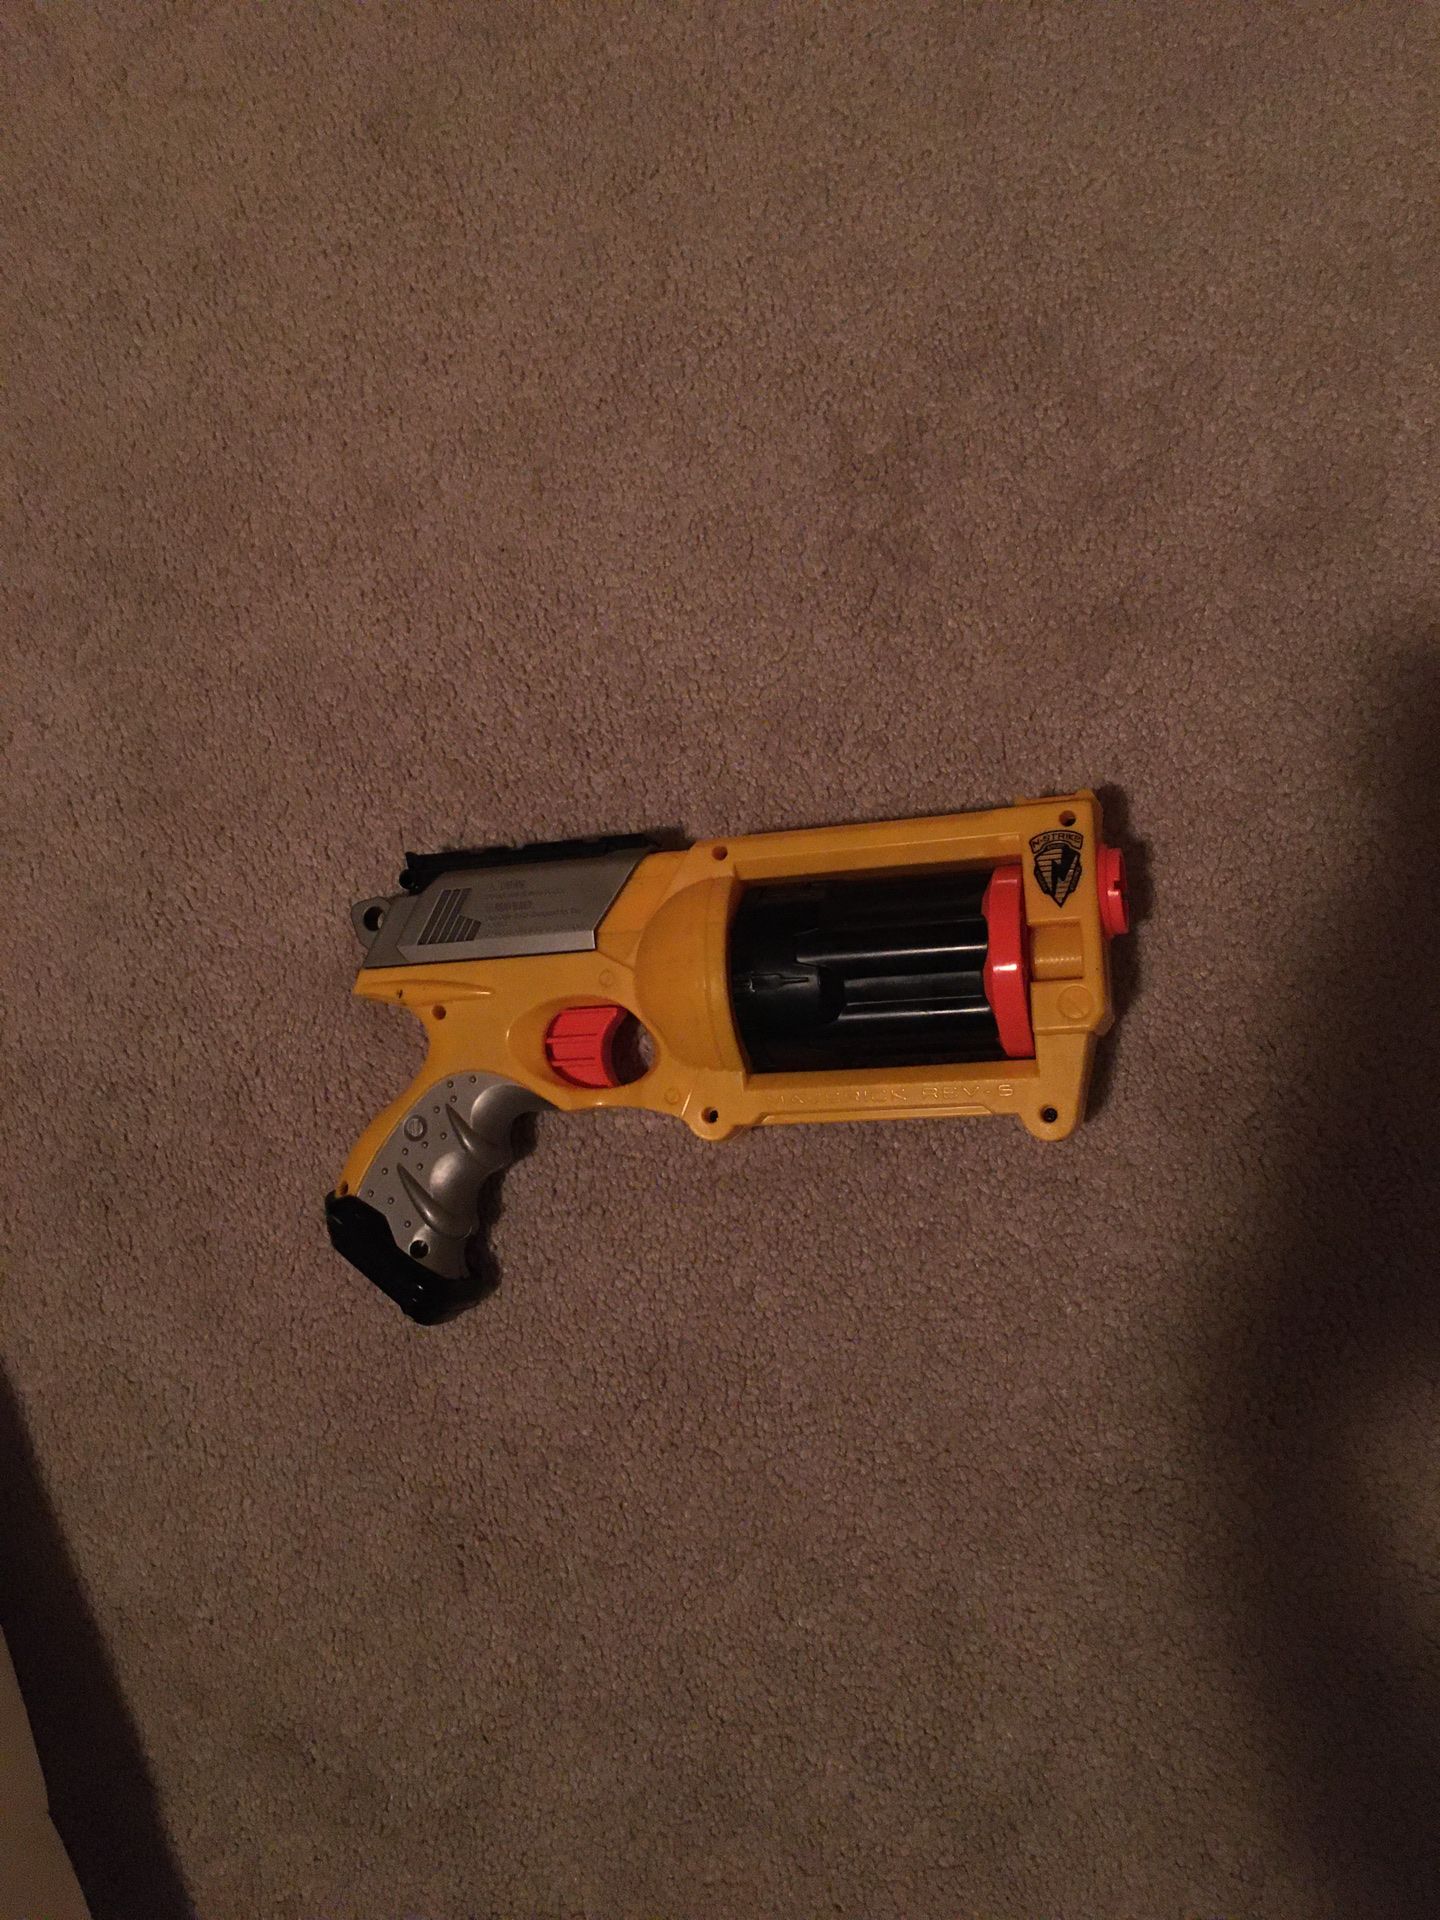 Nerf gun With bullets